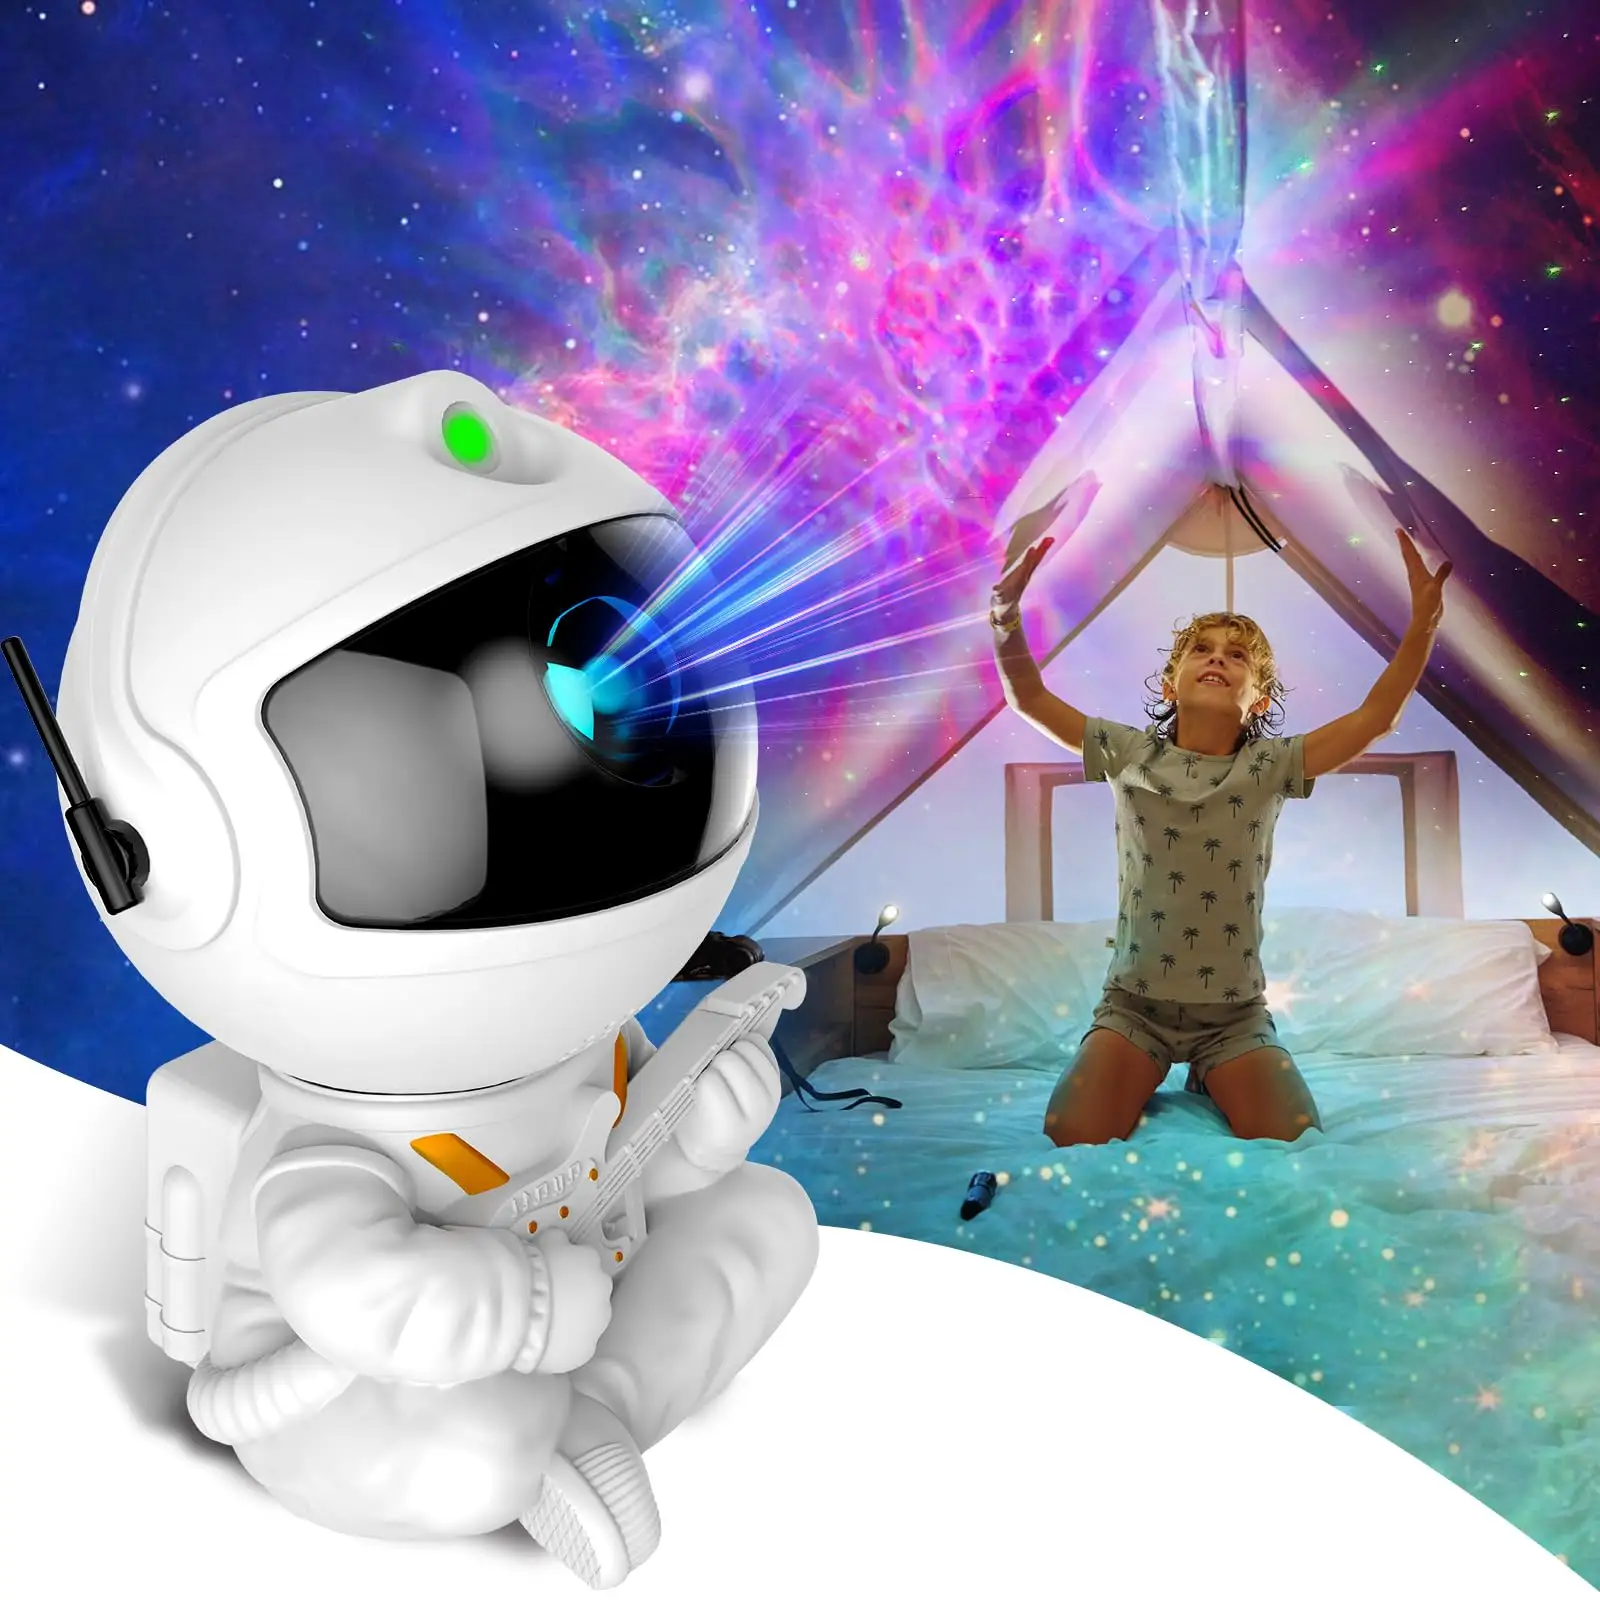 ODM OEM Astronaut Galaxy Projector Rotating Lamp Gift Timer Remote Party Game Room Ceiling Decor Astronaut Night Light Projector